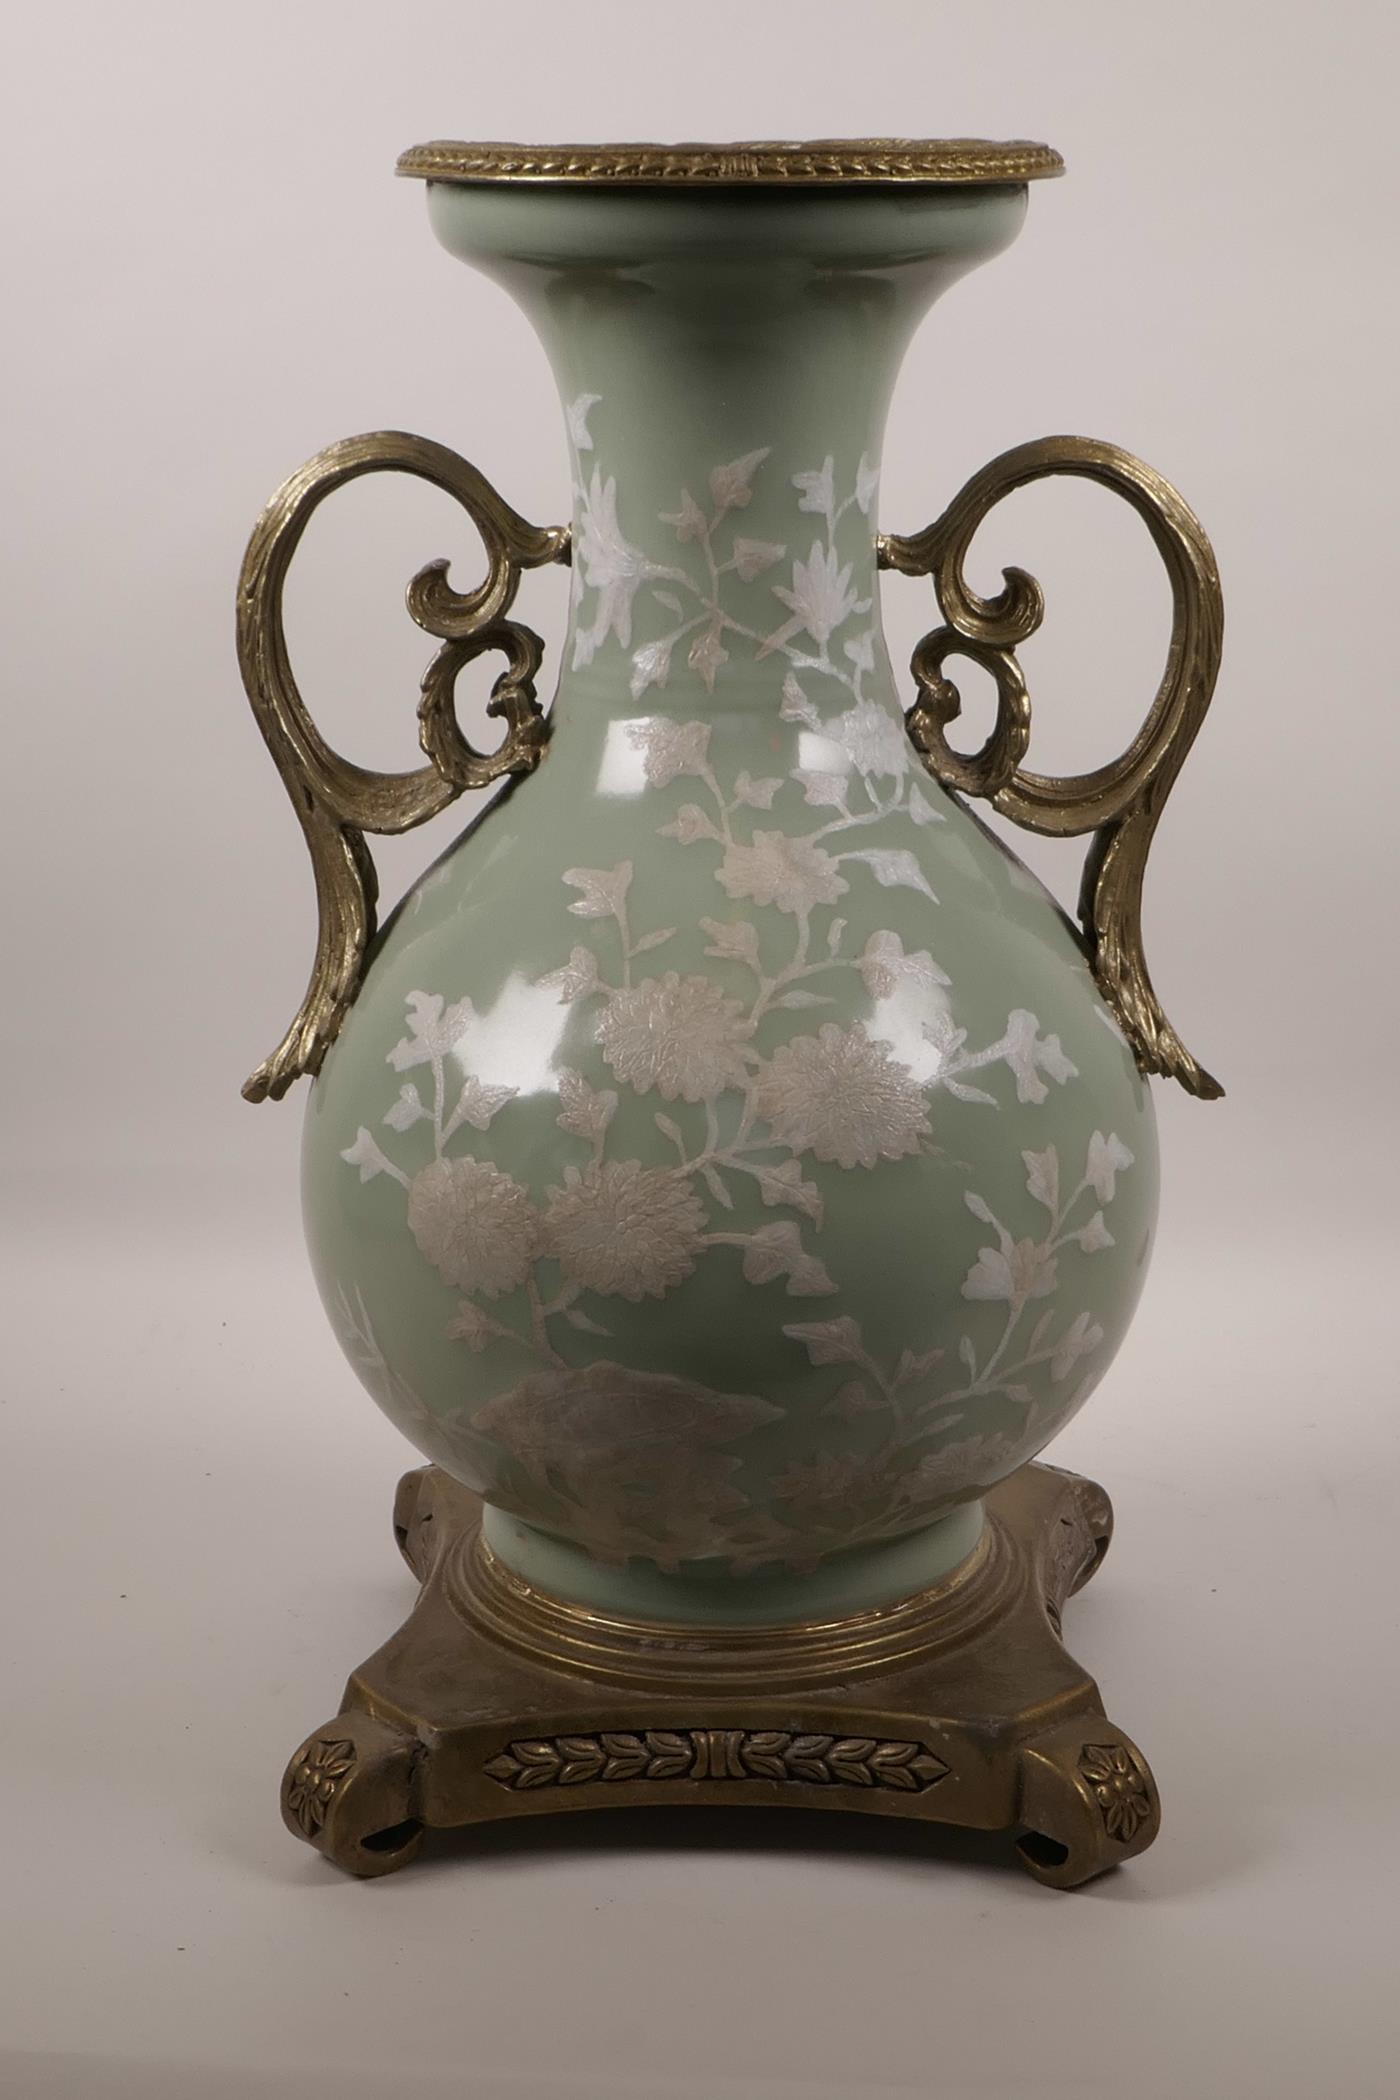 A Chinese celadon ground porcelain vase with later applied ormolu mounts and handles, and white